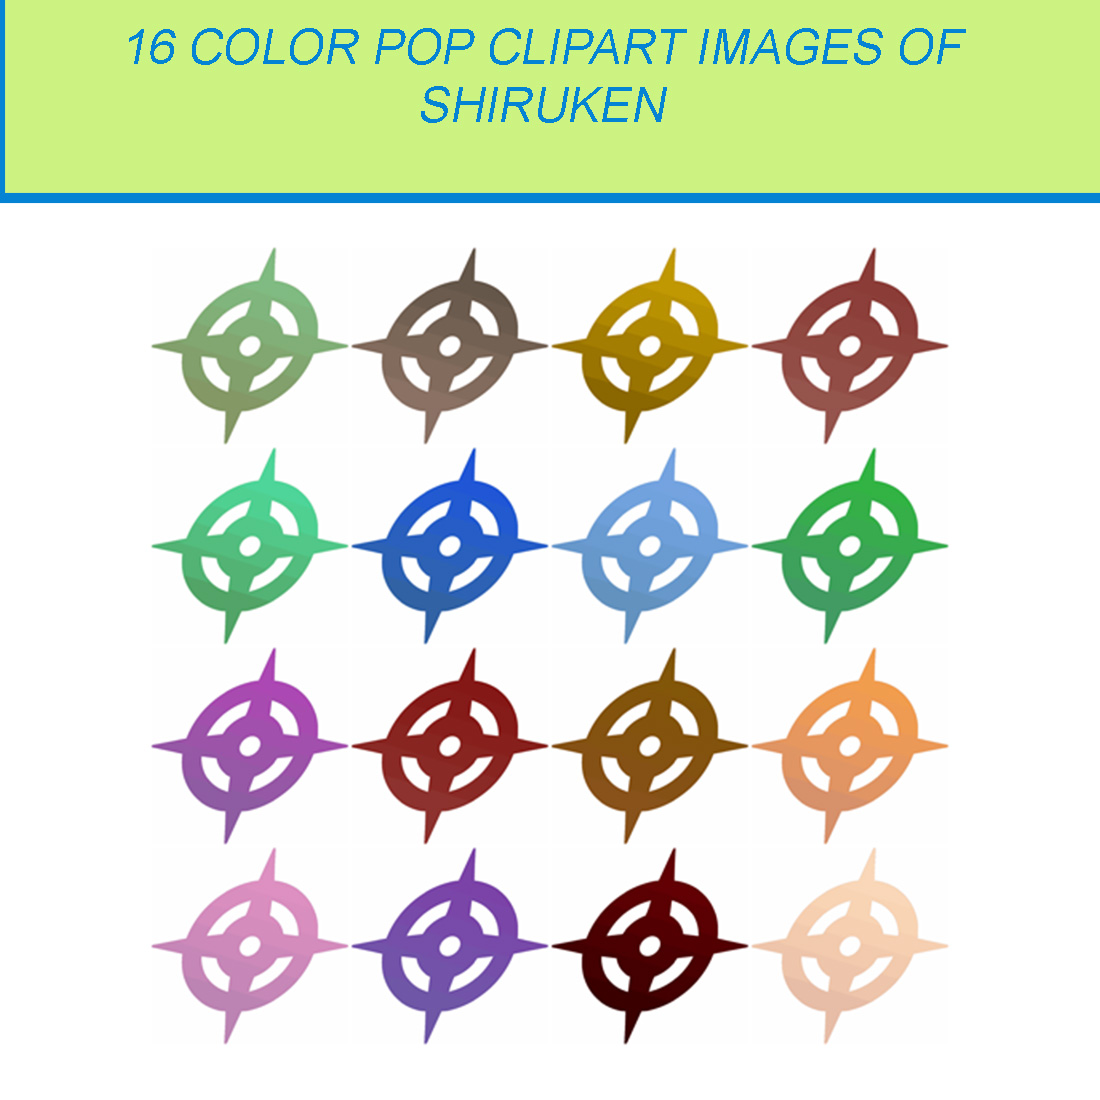 16 COLOR POP CLIPART IMAGES OF SHIRUKEN cover image.